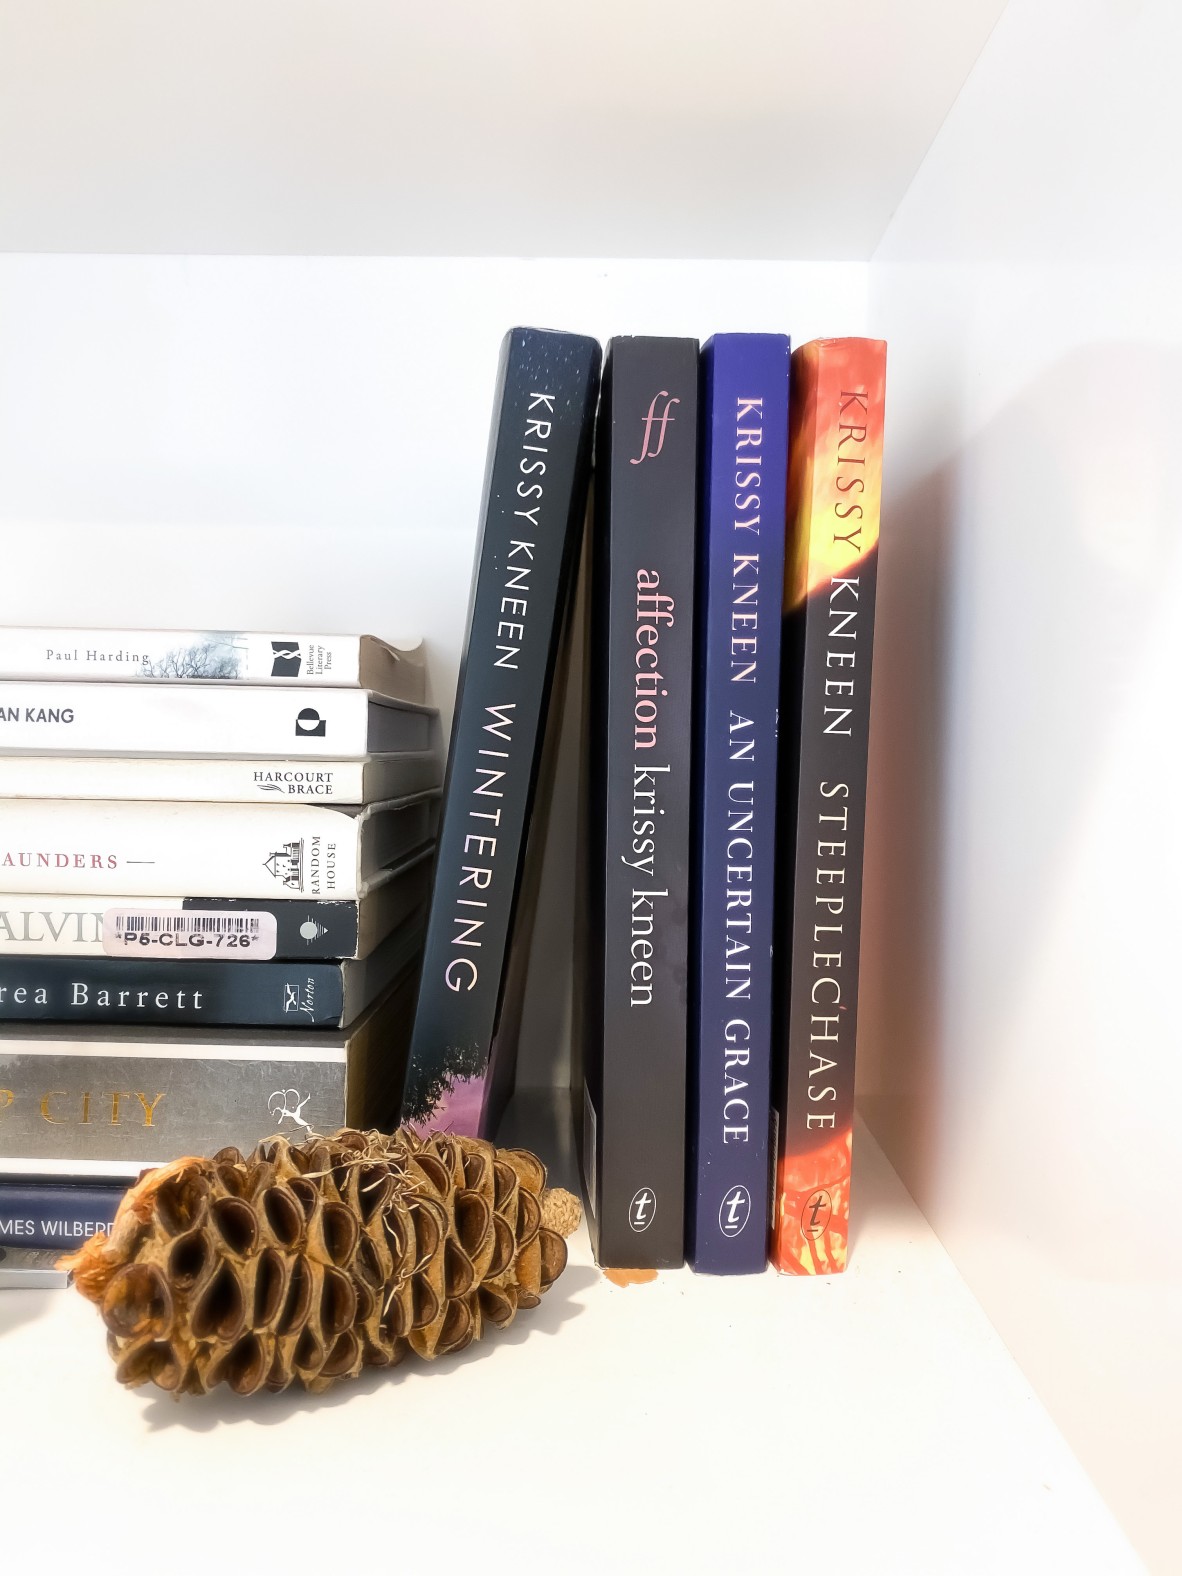 A banskia pod sits on a shelf in front of four books by Krissy Kneen spines out